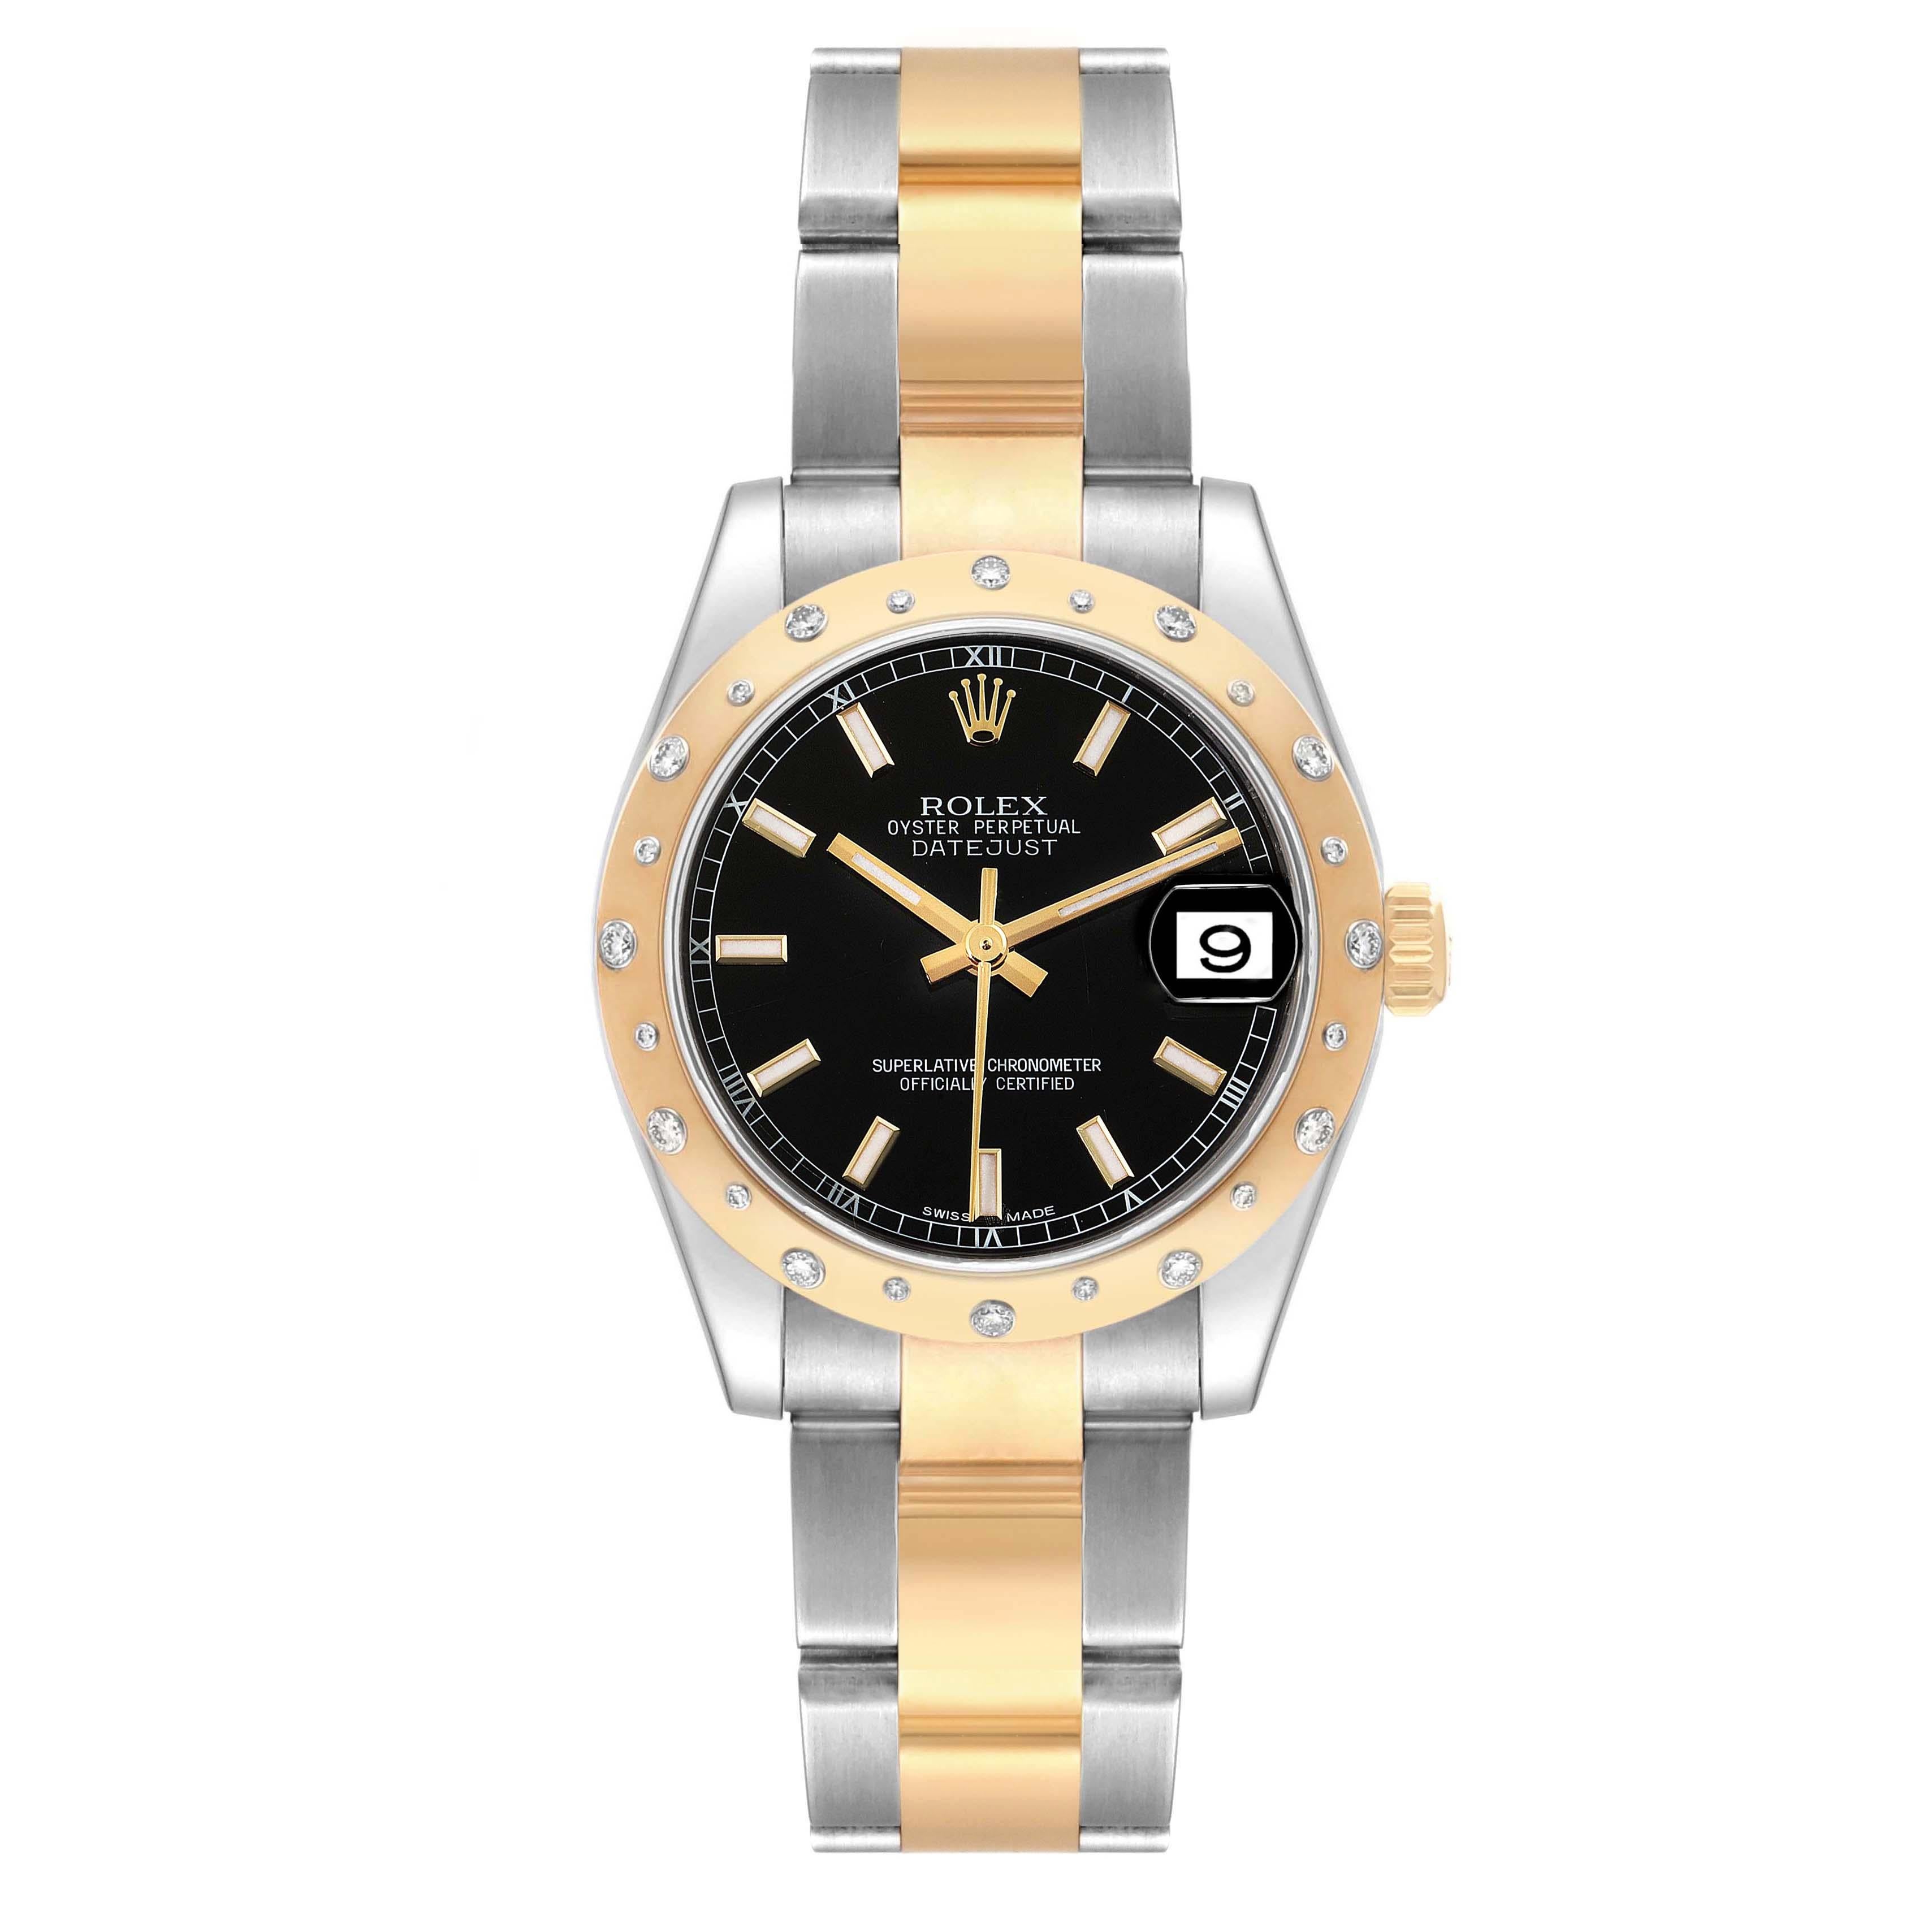 Rolex Datejust Midsize Steel Yellow Gold Diamond Ladies Watch 178343 Box Card. Officially certified chronometer automatic self-winding movement with quickset date function. Stainless steel and 18K yellow gold oyster case 31.0 mm in diameter. Rolex